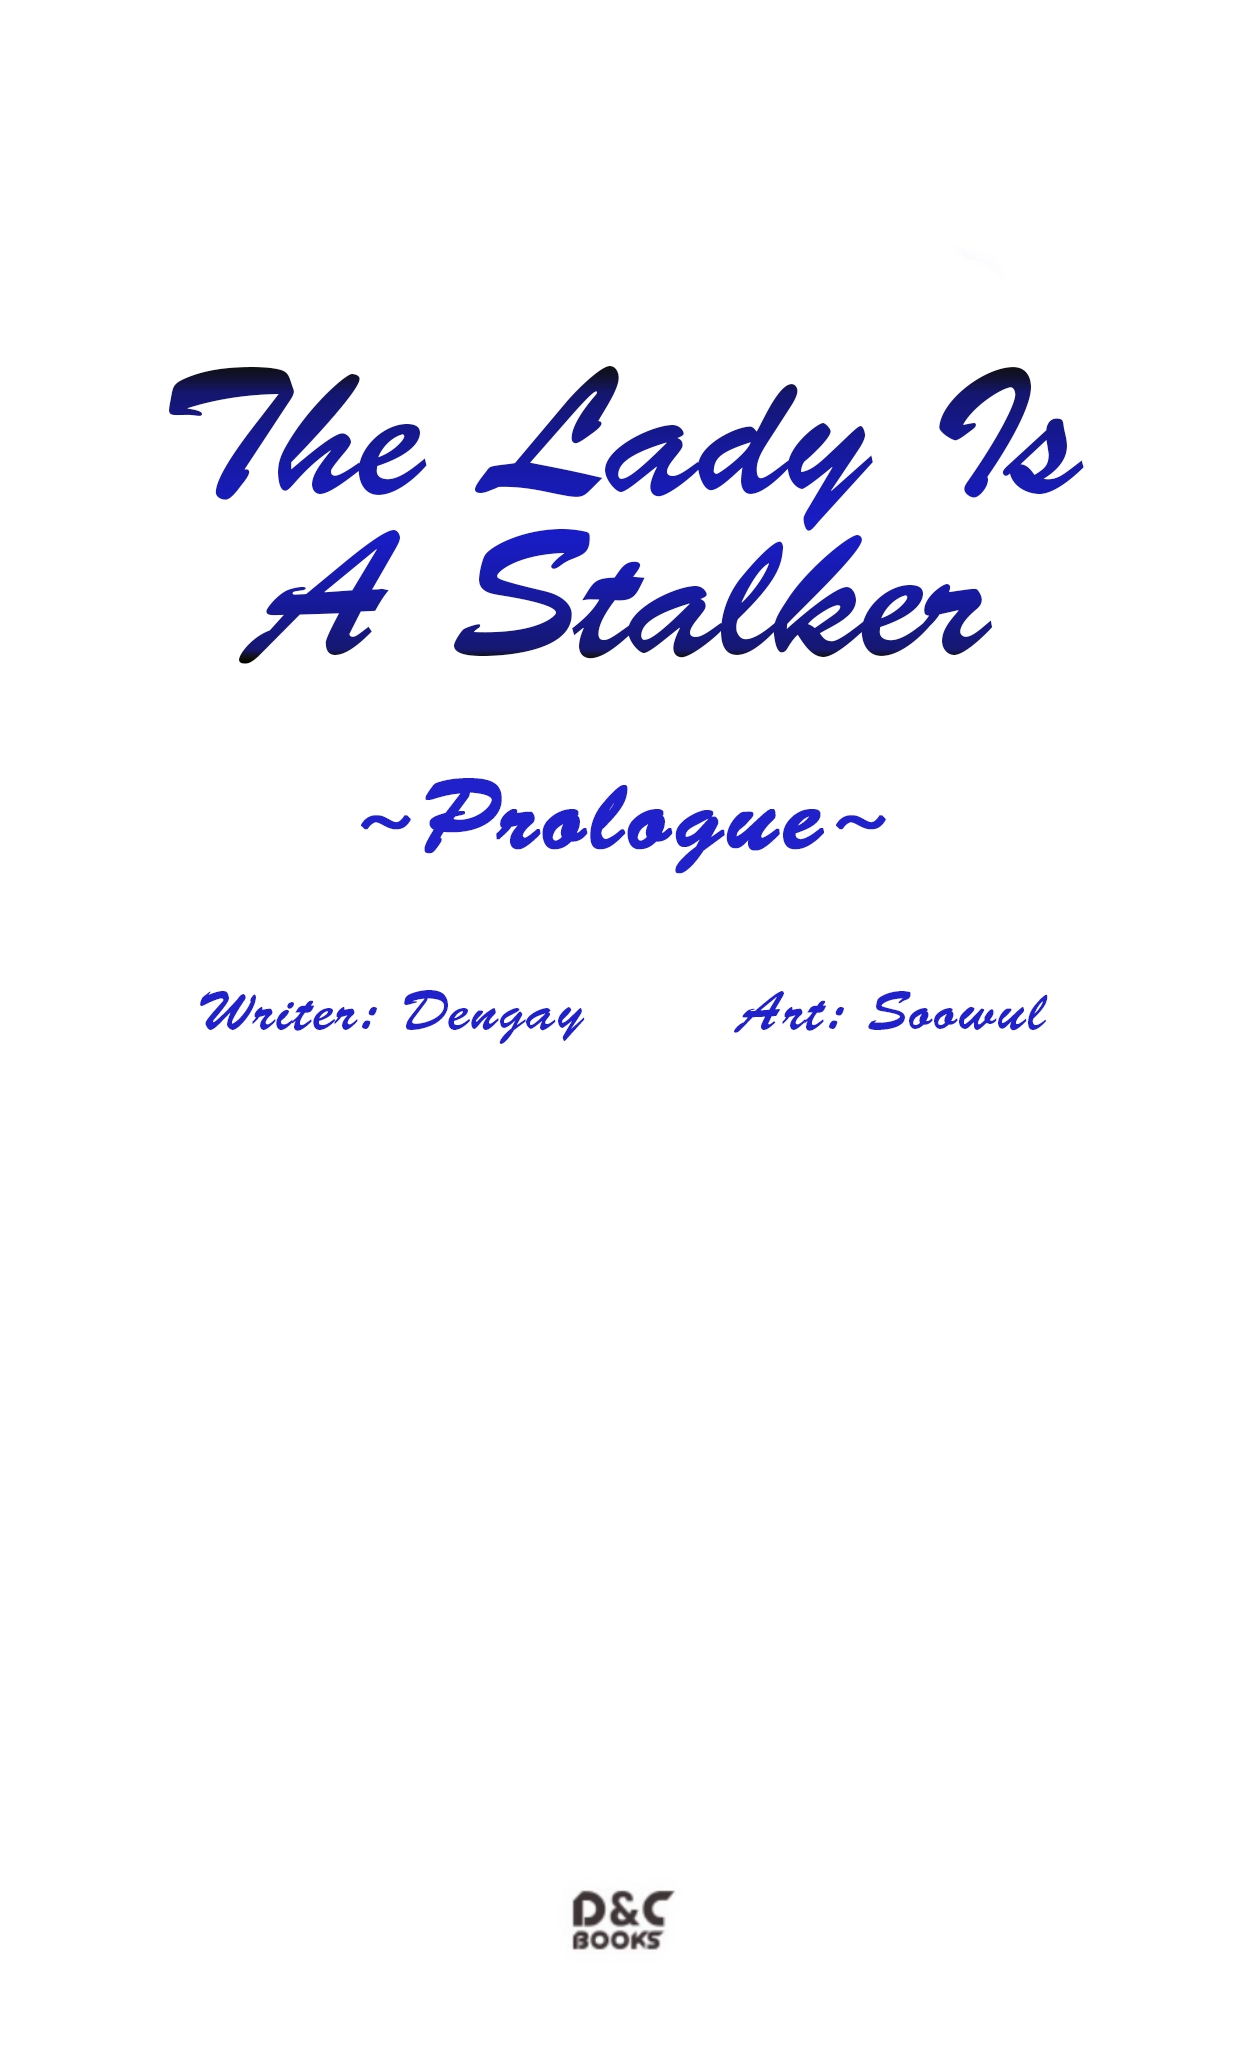 The Lady Is a Stalker Promo